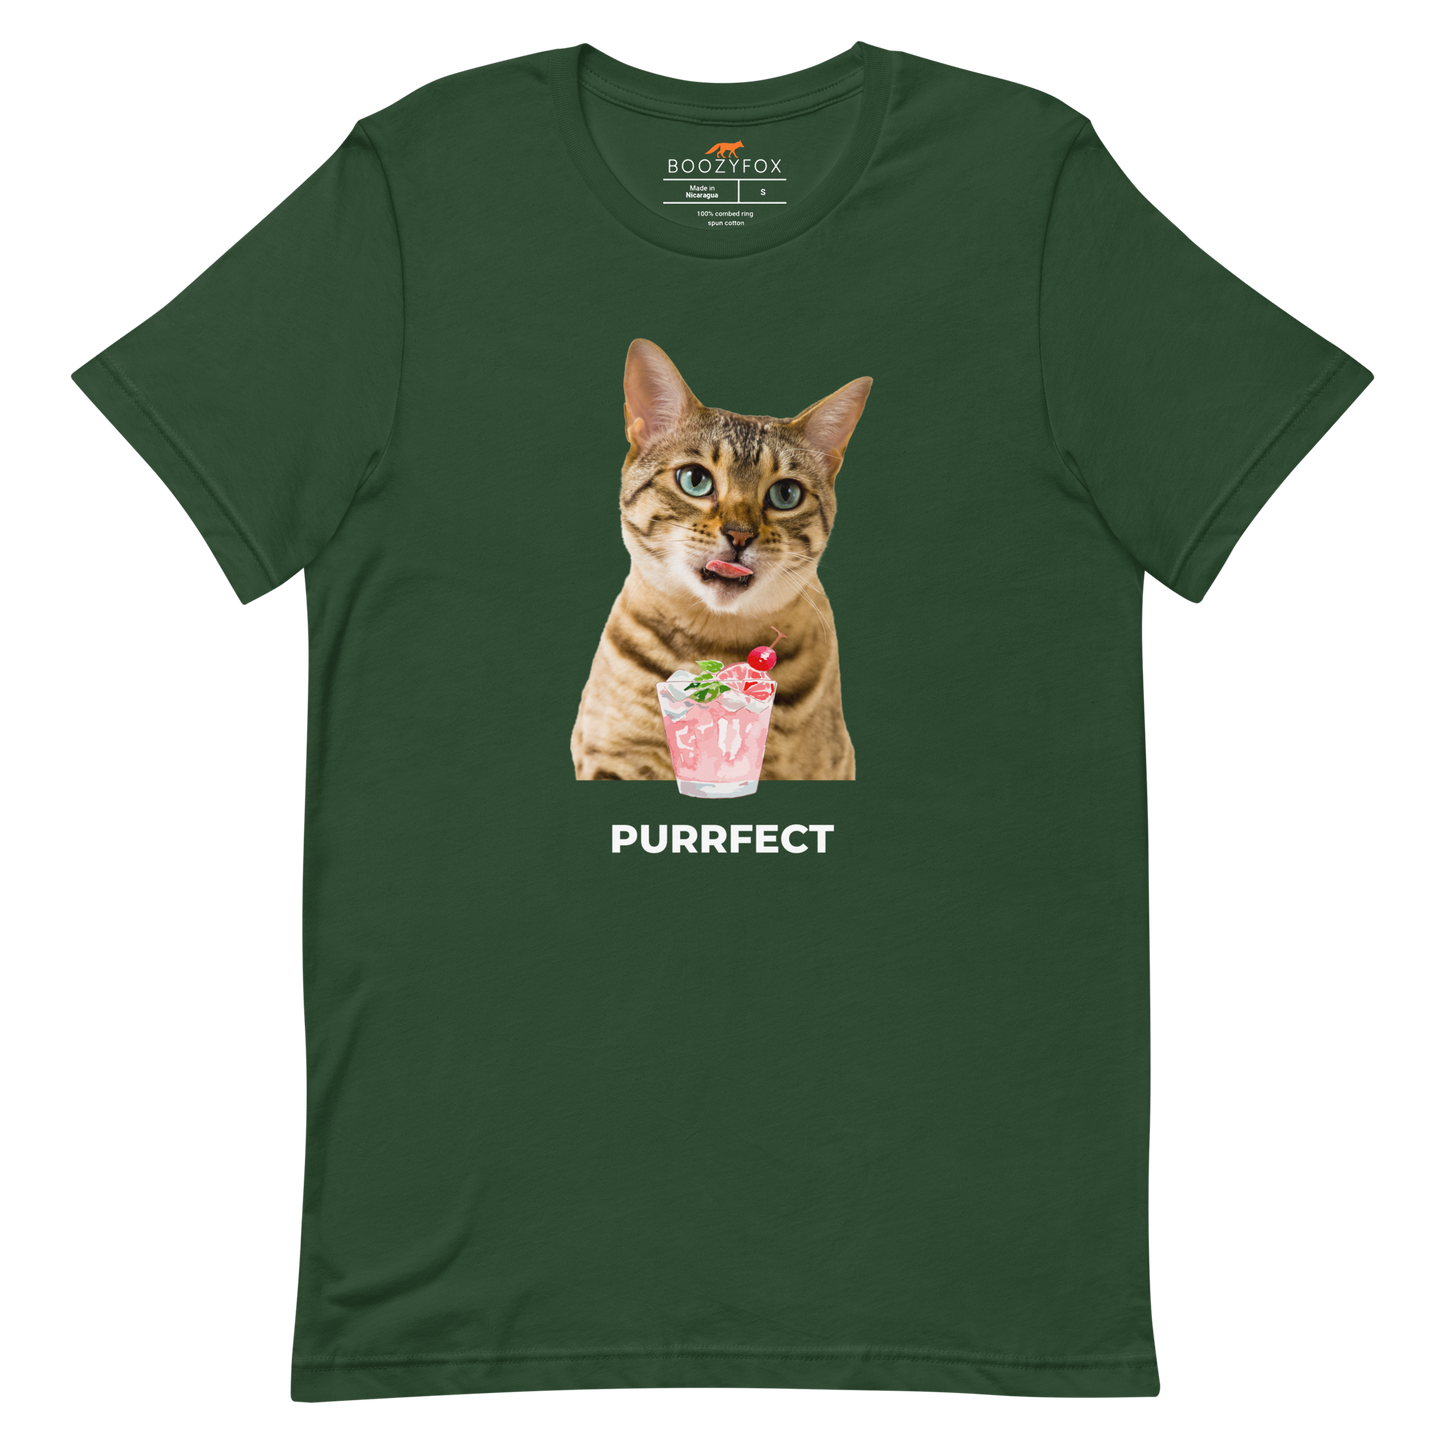 Forest Green Premium Cat T-Shirt featuring a Purrfect graphic on the chest - Funny Graphic Cat Tees - Boozy Fox